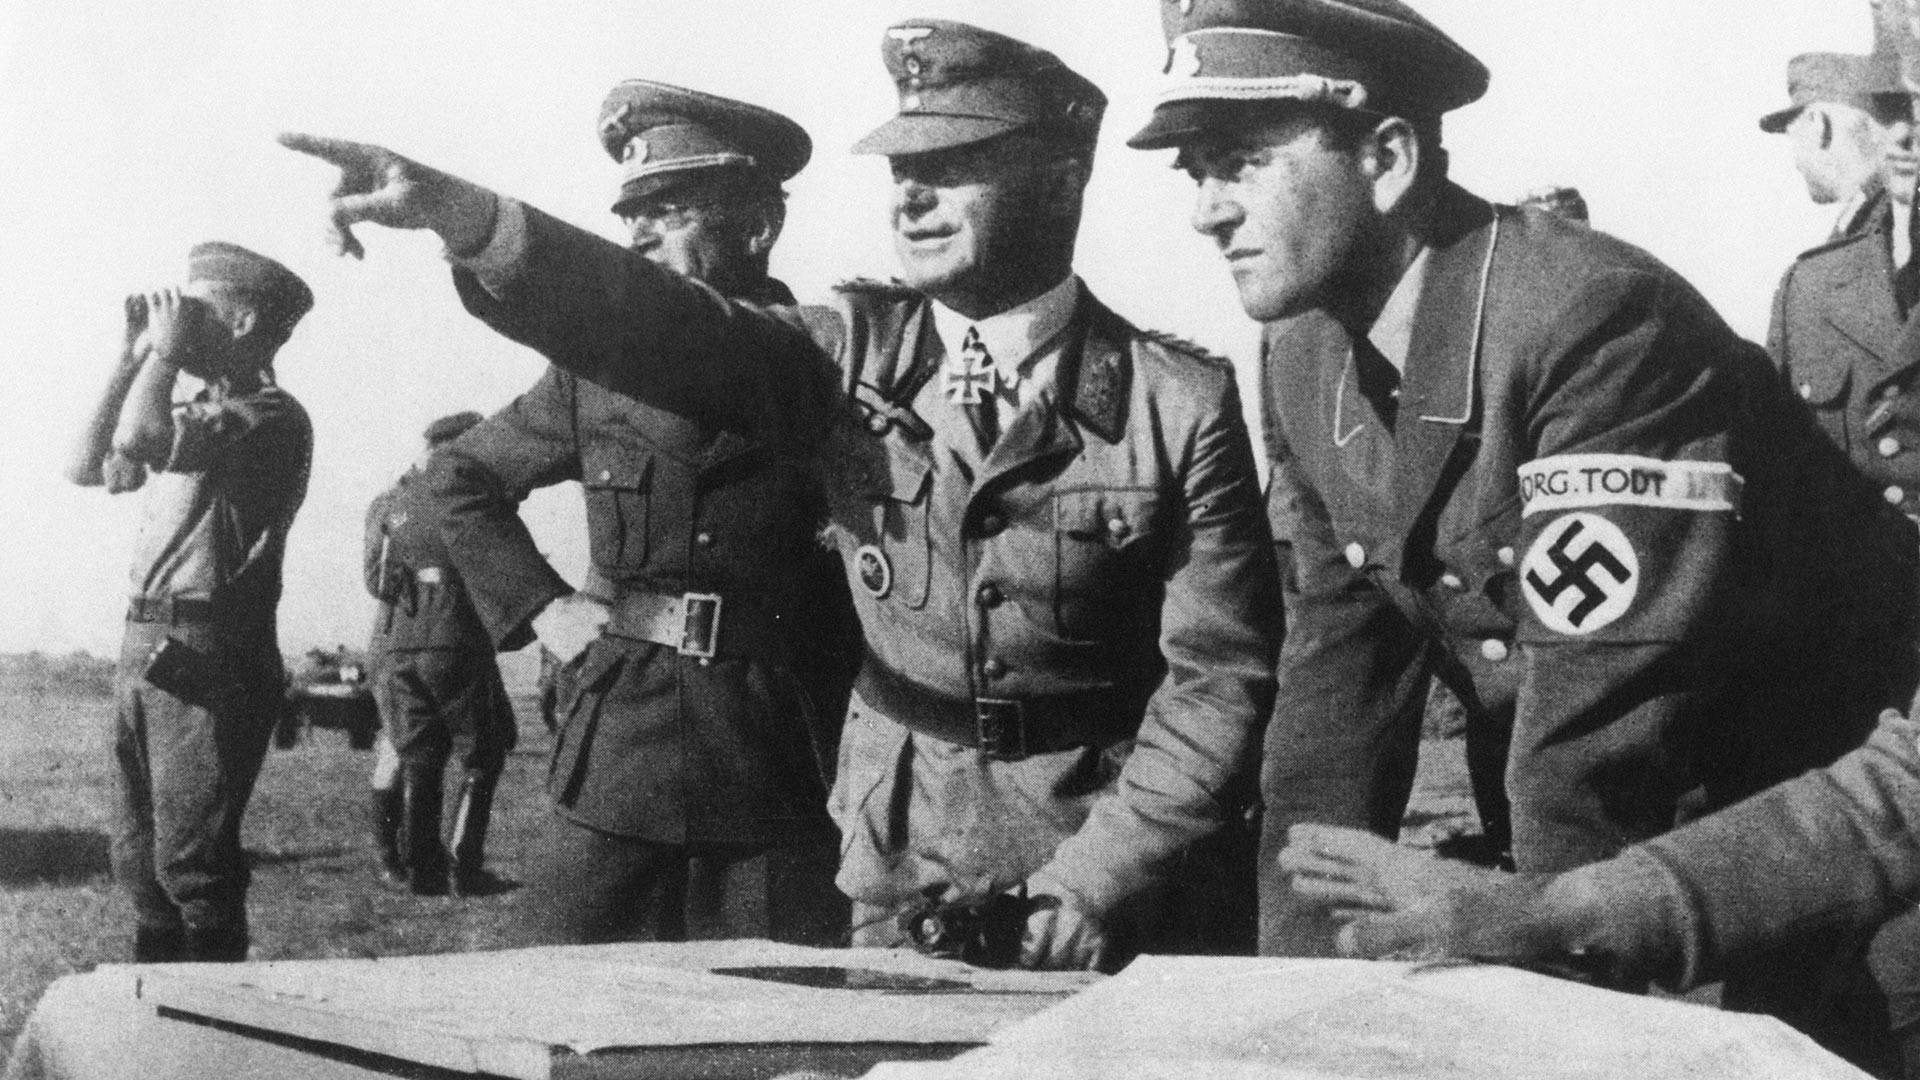 Albert Speer, German Minister of Armaments and War Production for the Third Reich, with officers of the Organisation Todt military engineering group on the Eastern Front, 1943.